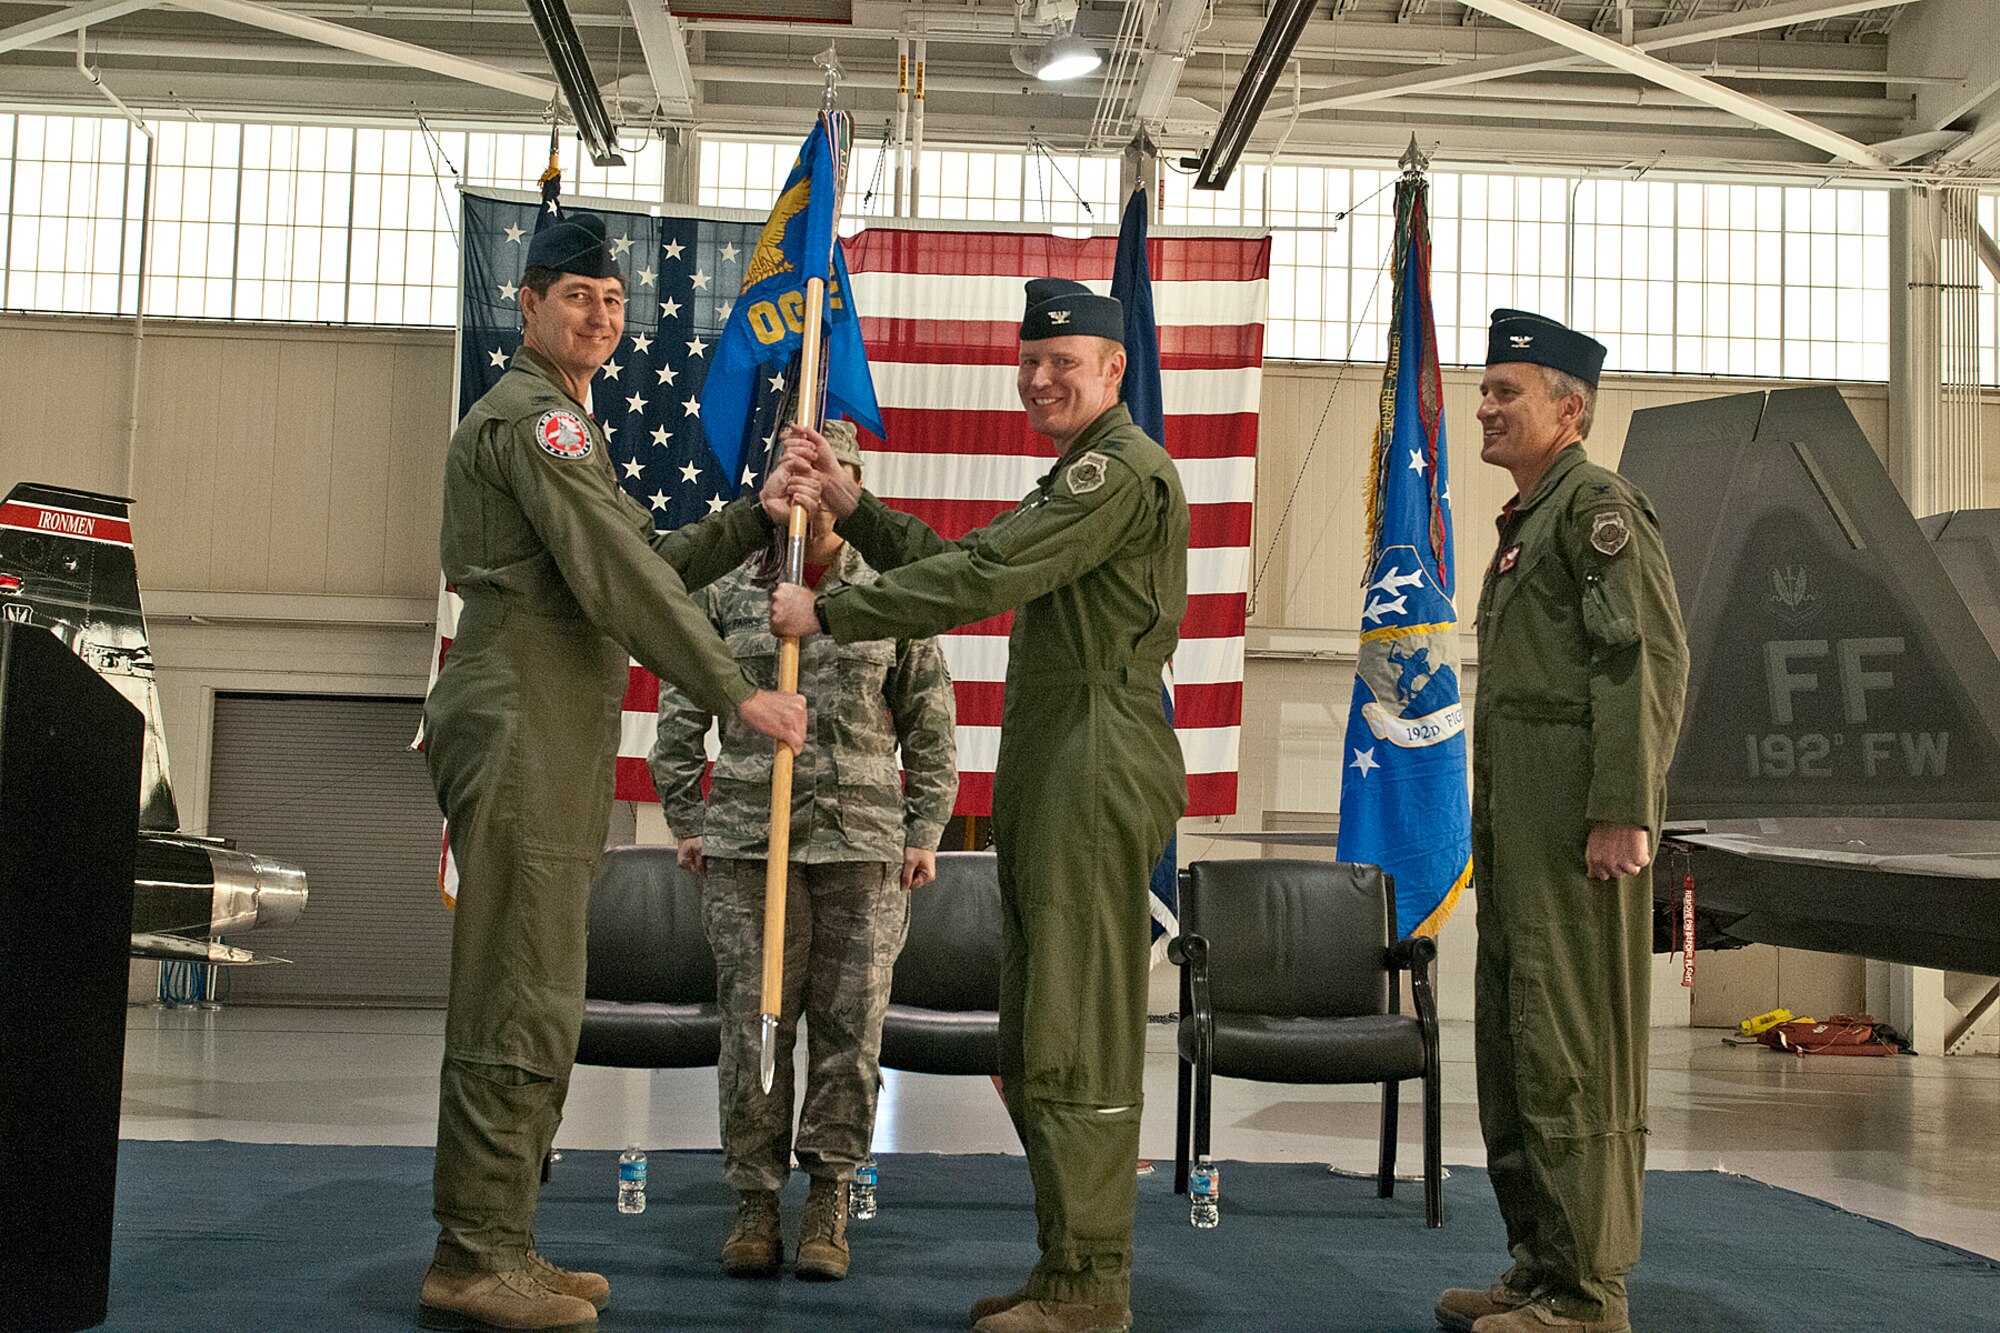 The Virginia Air National Guard 192nd Fighter Wing welcomed Col. Bryan “Coho” Salmon as the new 192nd Operations Group commander during a change of command ceremony at Joint Base Langley-Eustis, Virginia, Nov. 20, 2016. (U.S. Air National Guard photo by Senior Airman Johnisa B. Roberts)